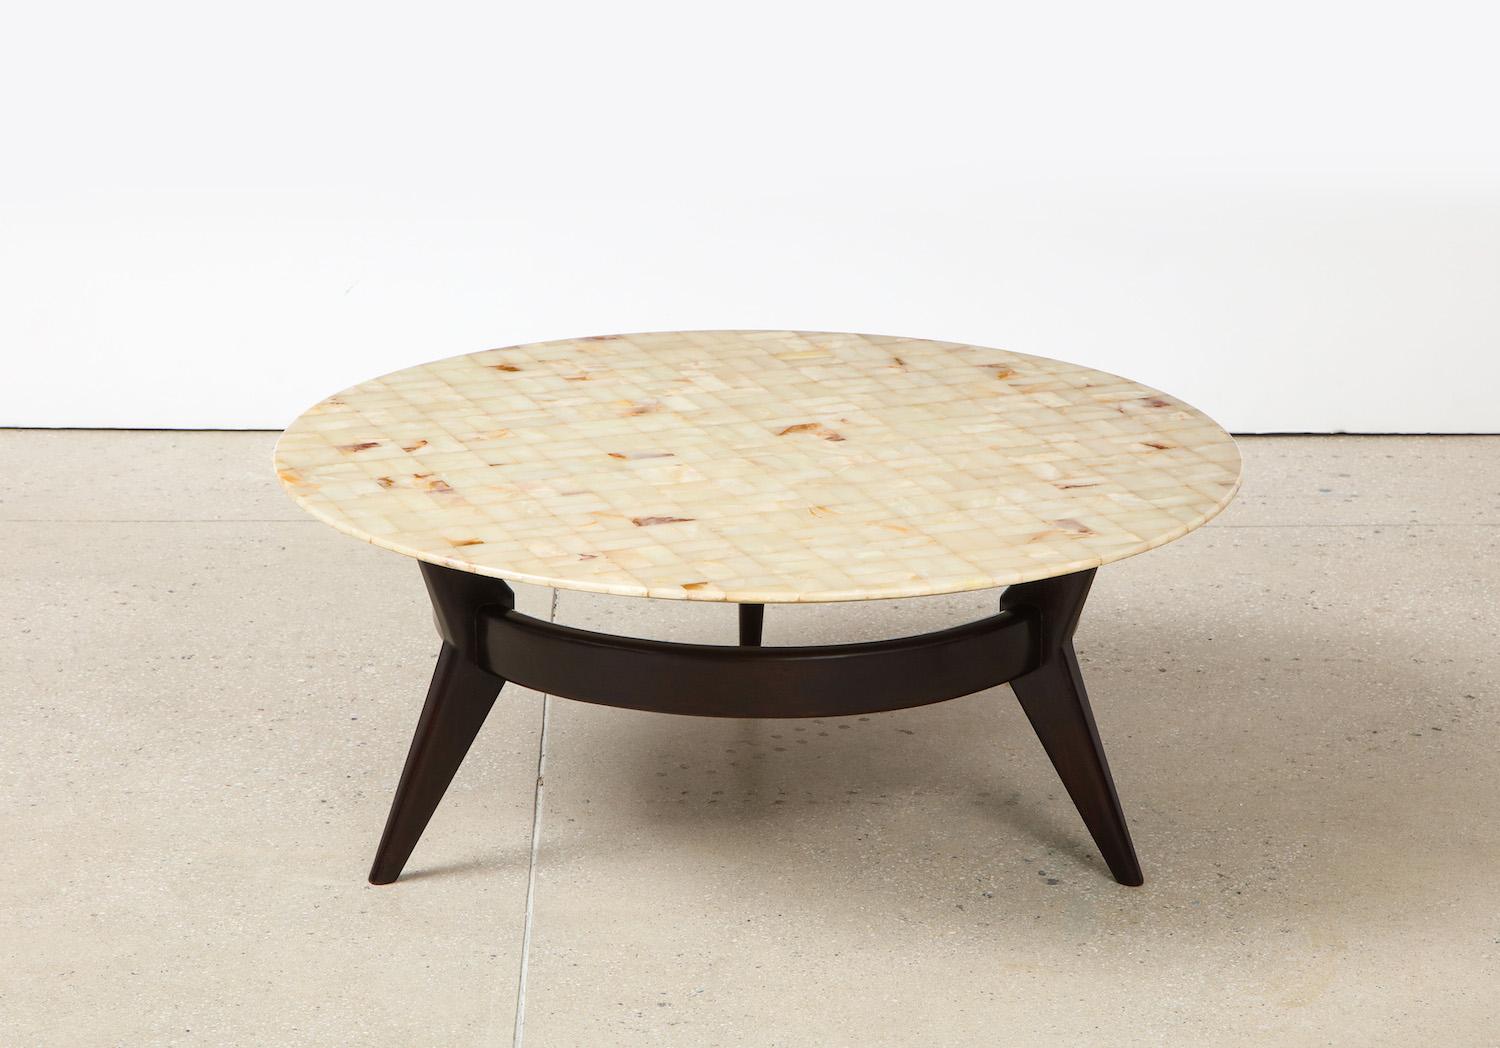 Rare circular cocktail table by Ico Parisi. Circular low table of dark stained mahogany with wide center stretcher. Rare 3-legged variant. Removable top of onyx arranged into a mosaic pattern. Produced custom by Brugnoli Mobili, Cantù. Published: